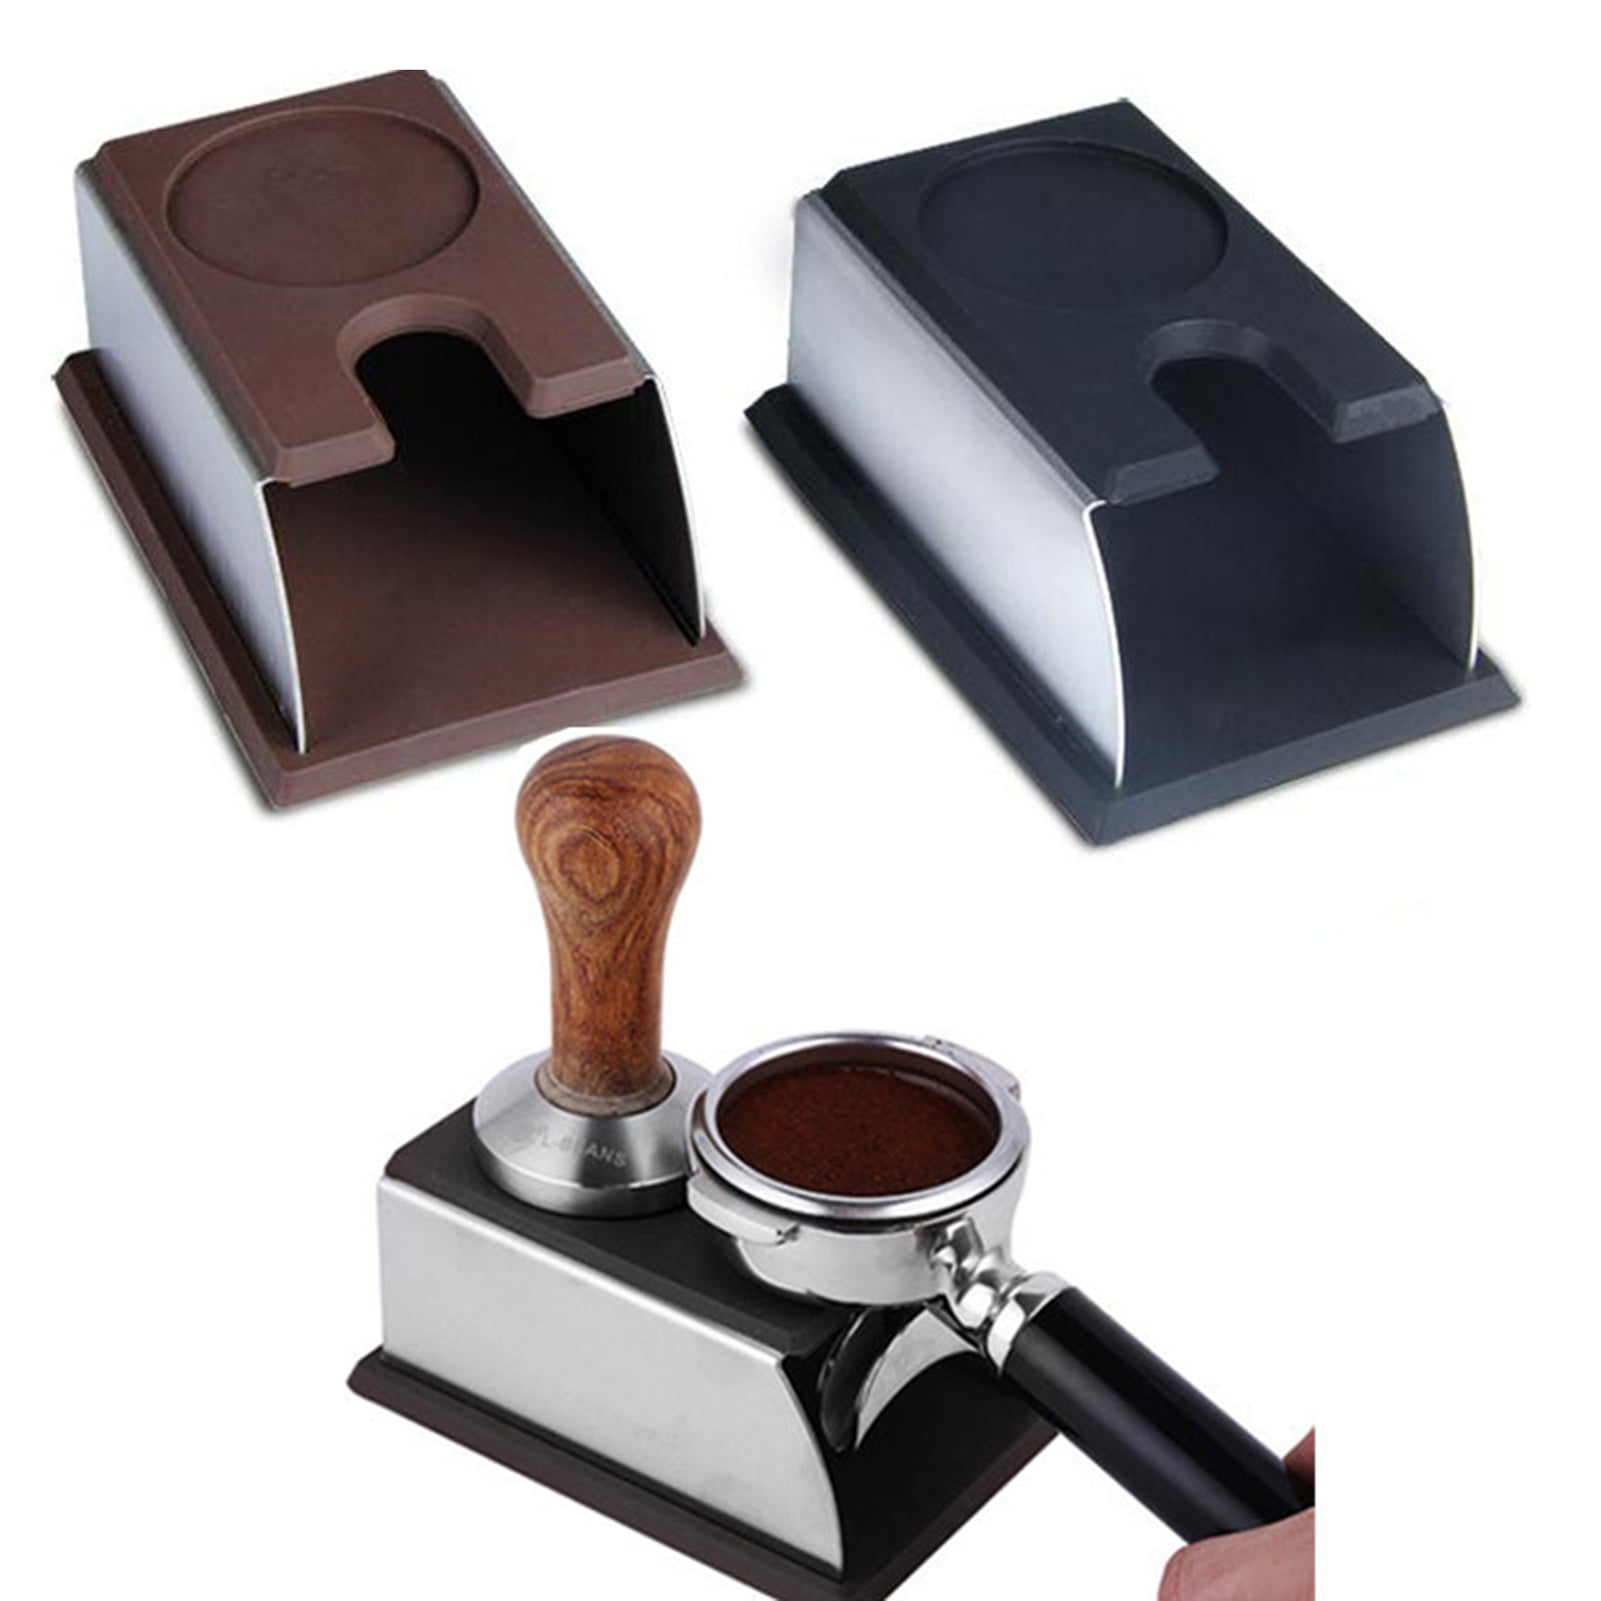 Details about   Tamper Mat Anti Slip Latte Accessories Rest Silicone Pad Filler Coffee Powder